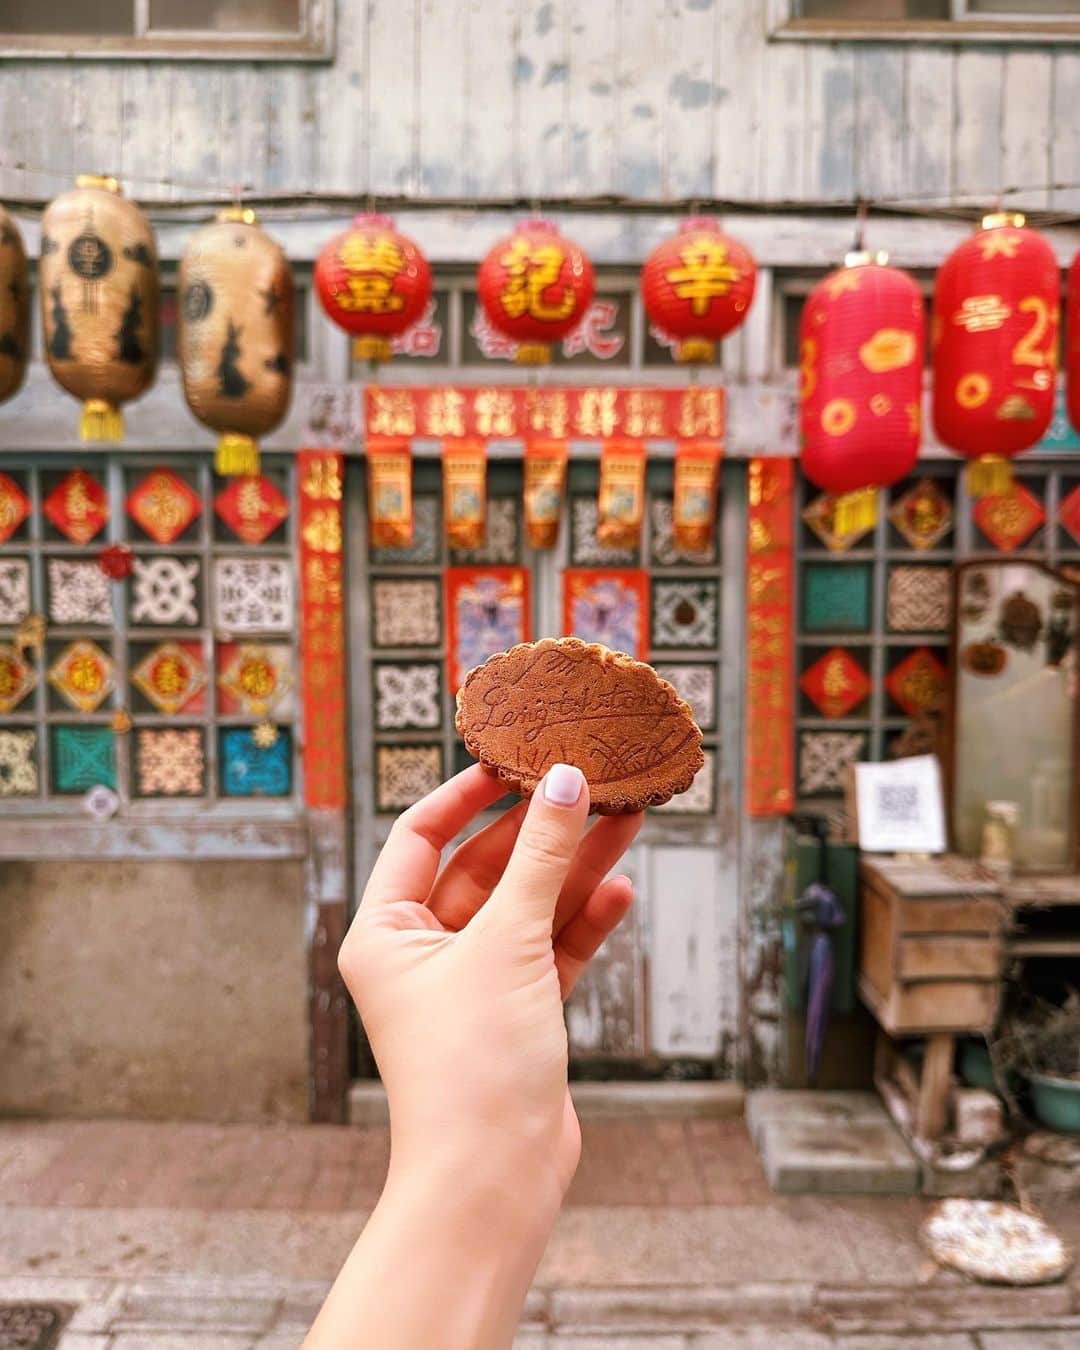 Girleatworldのインスタグラム：「Tainan is the oldest city in Taiwan, first established during the Dutch colonization era in the 1600s. From then on, it was known as the ancient capital city of Taiwan. It continues to hold the title of the capital city for over 200 years, until the 18th century when the capital was moved to Taichung and then to Taipei, where the capital city currently sits.  This is egg cookie from Leng Tih Tong, a local cookie maker that has been operating for a long time in Tainan - since the Japanese occupation days. On the first bite, this cookie tasted very nostalgic to me. And then, I realized why – it’s because the egg cookies taste pretty much identical to fortune cookies 😆🥠  On my visit to Taiwan a few weeks ago, I got to spend two days in Tainan! Check out my blog to see what you can do there」